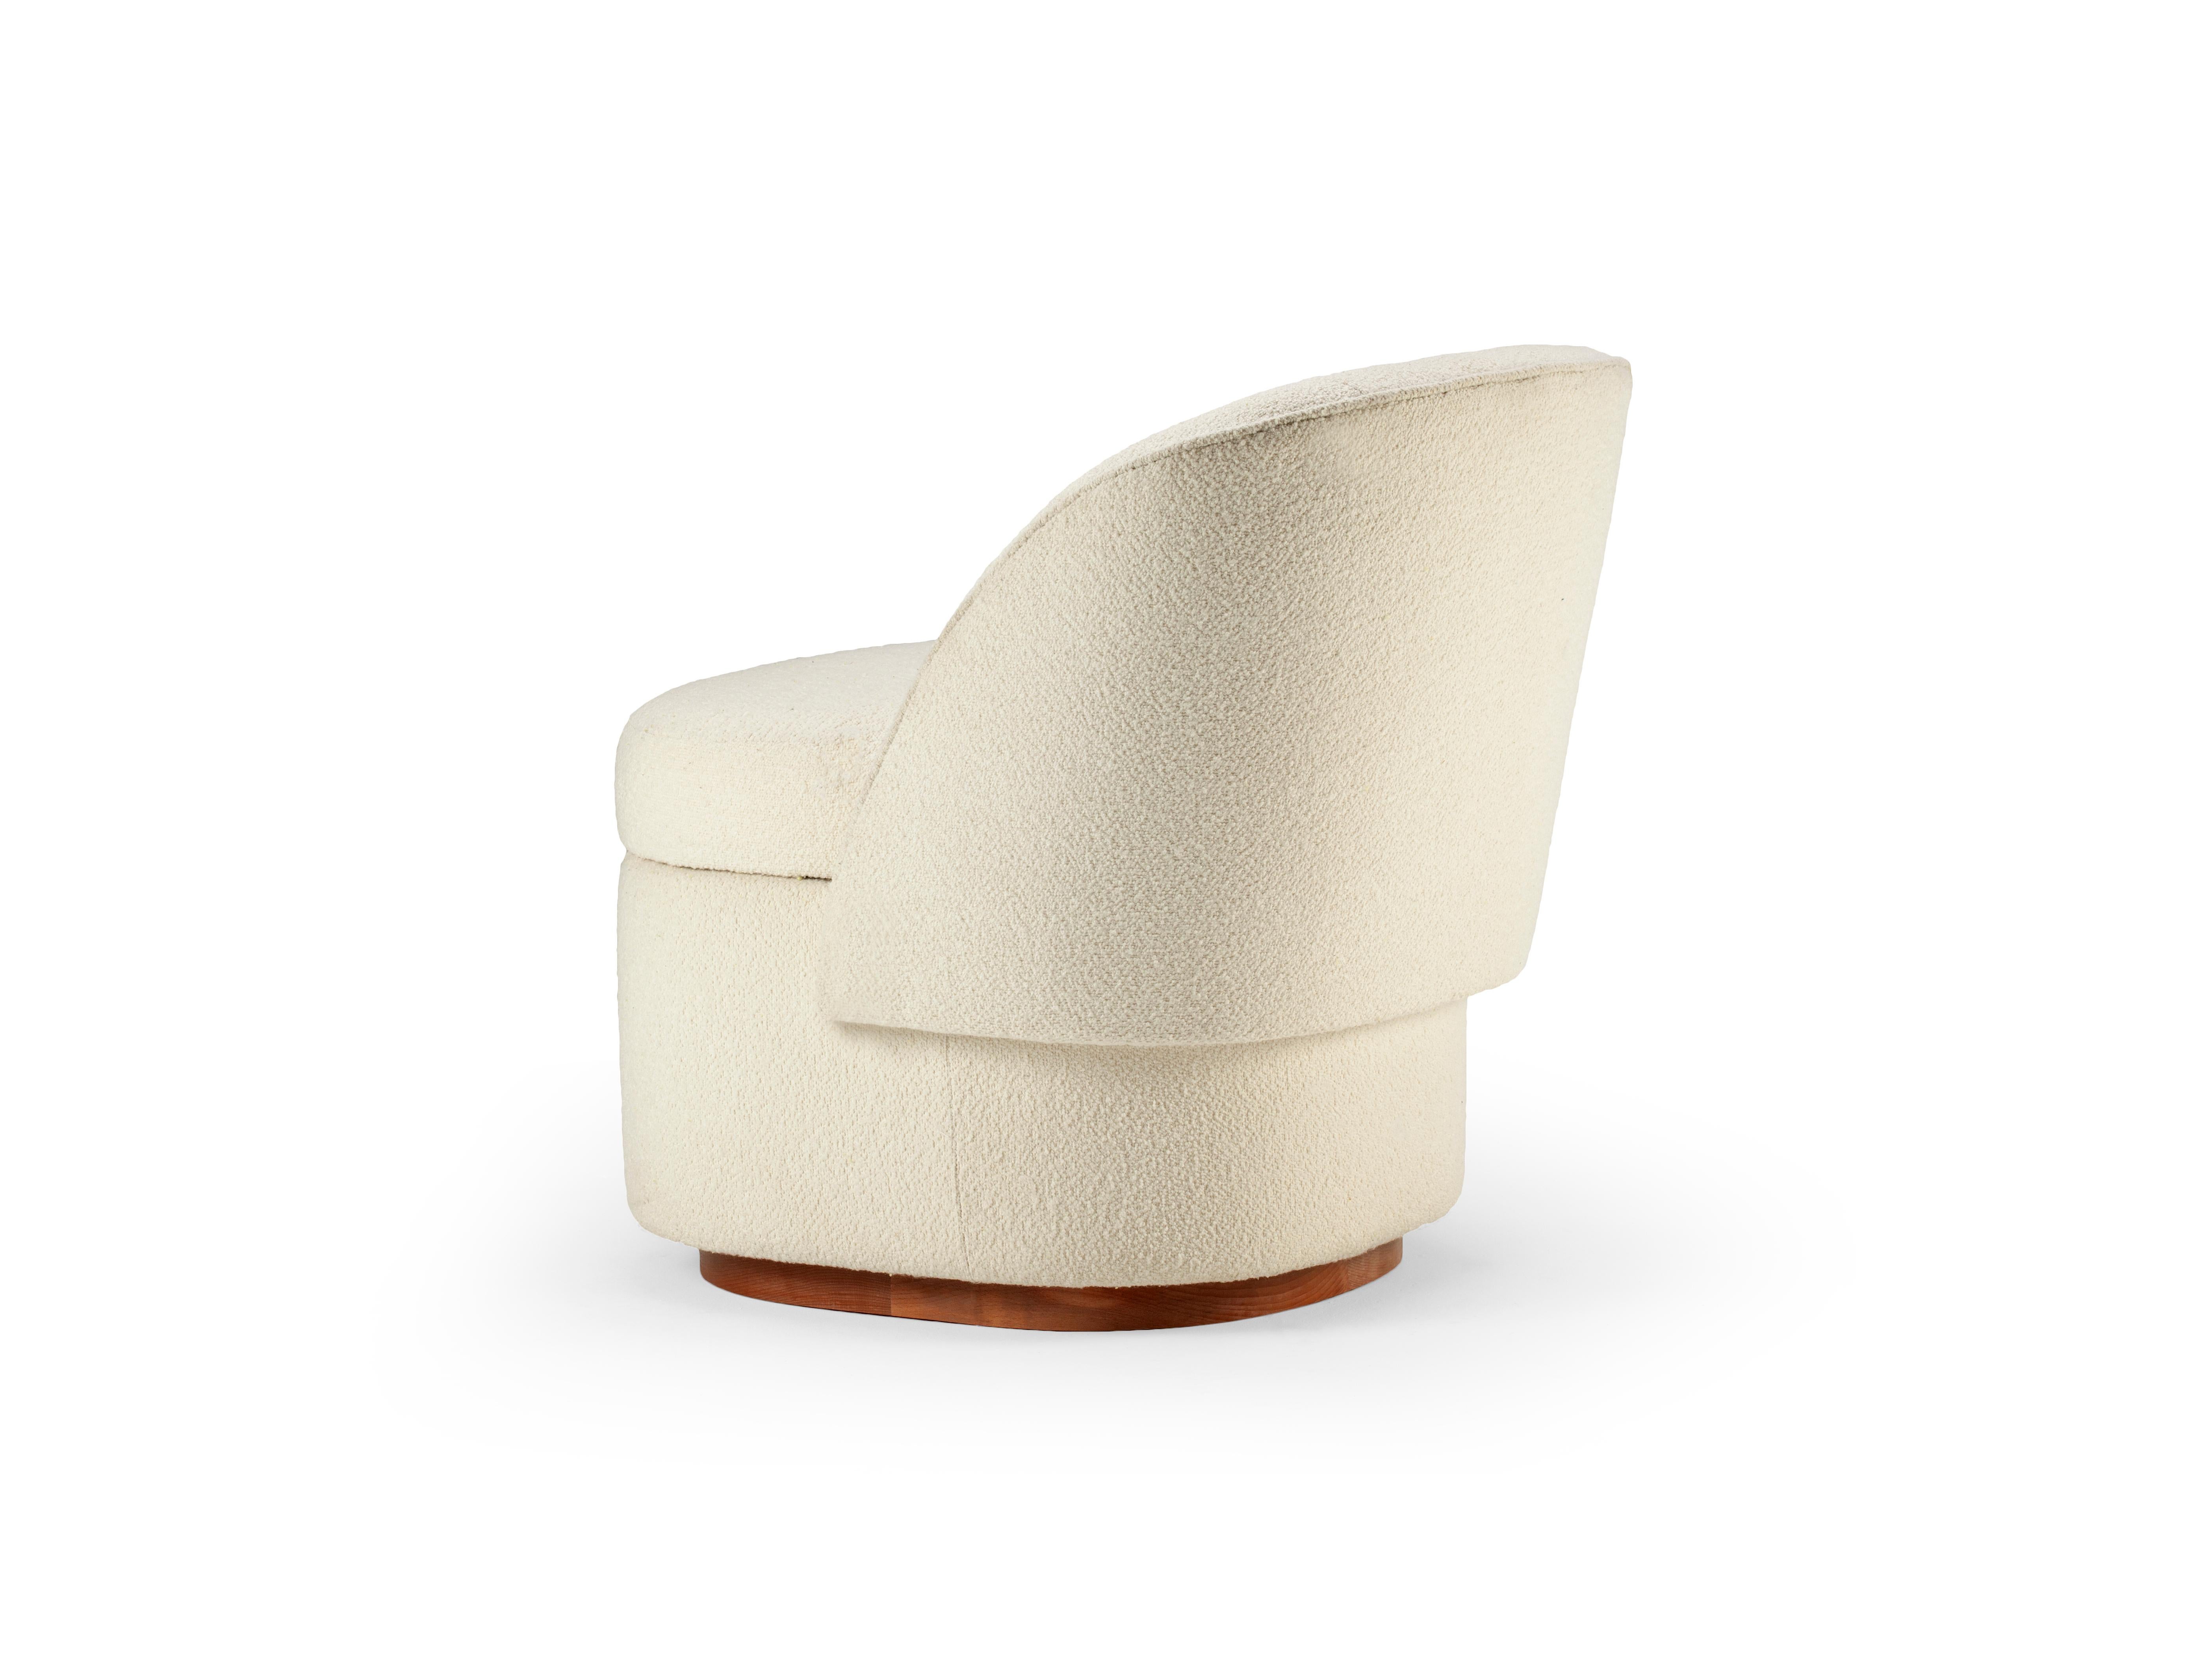 Swooping curves, softly returning arms, and sculptural shape define the Bisou Armchair. The tight but soft seat and back along with clean seam detailing give this piece a clean, tailored appearance, featuring incredibly comfortable upholstery and a